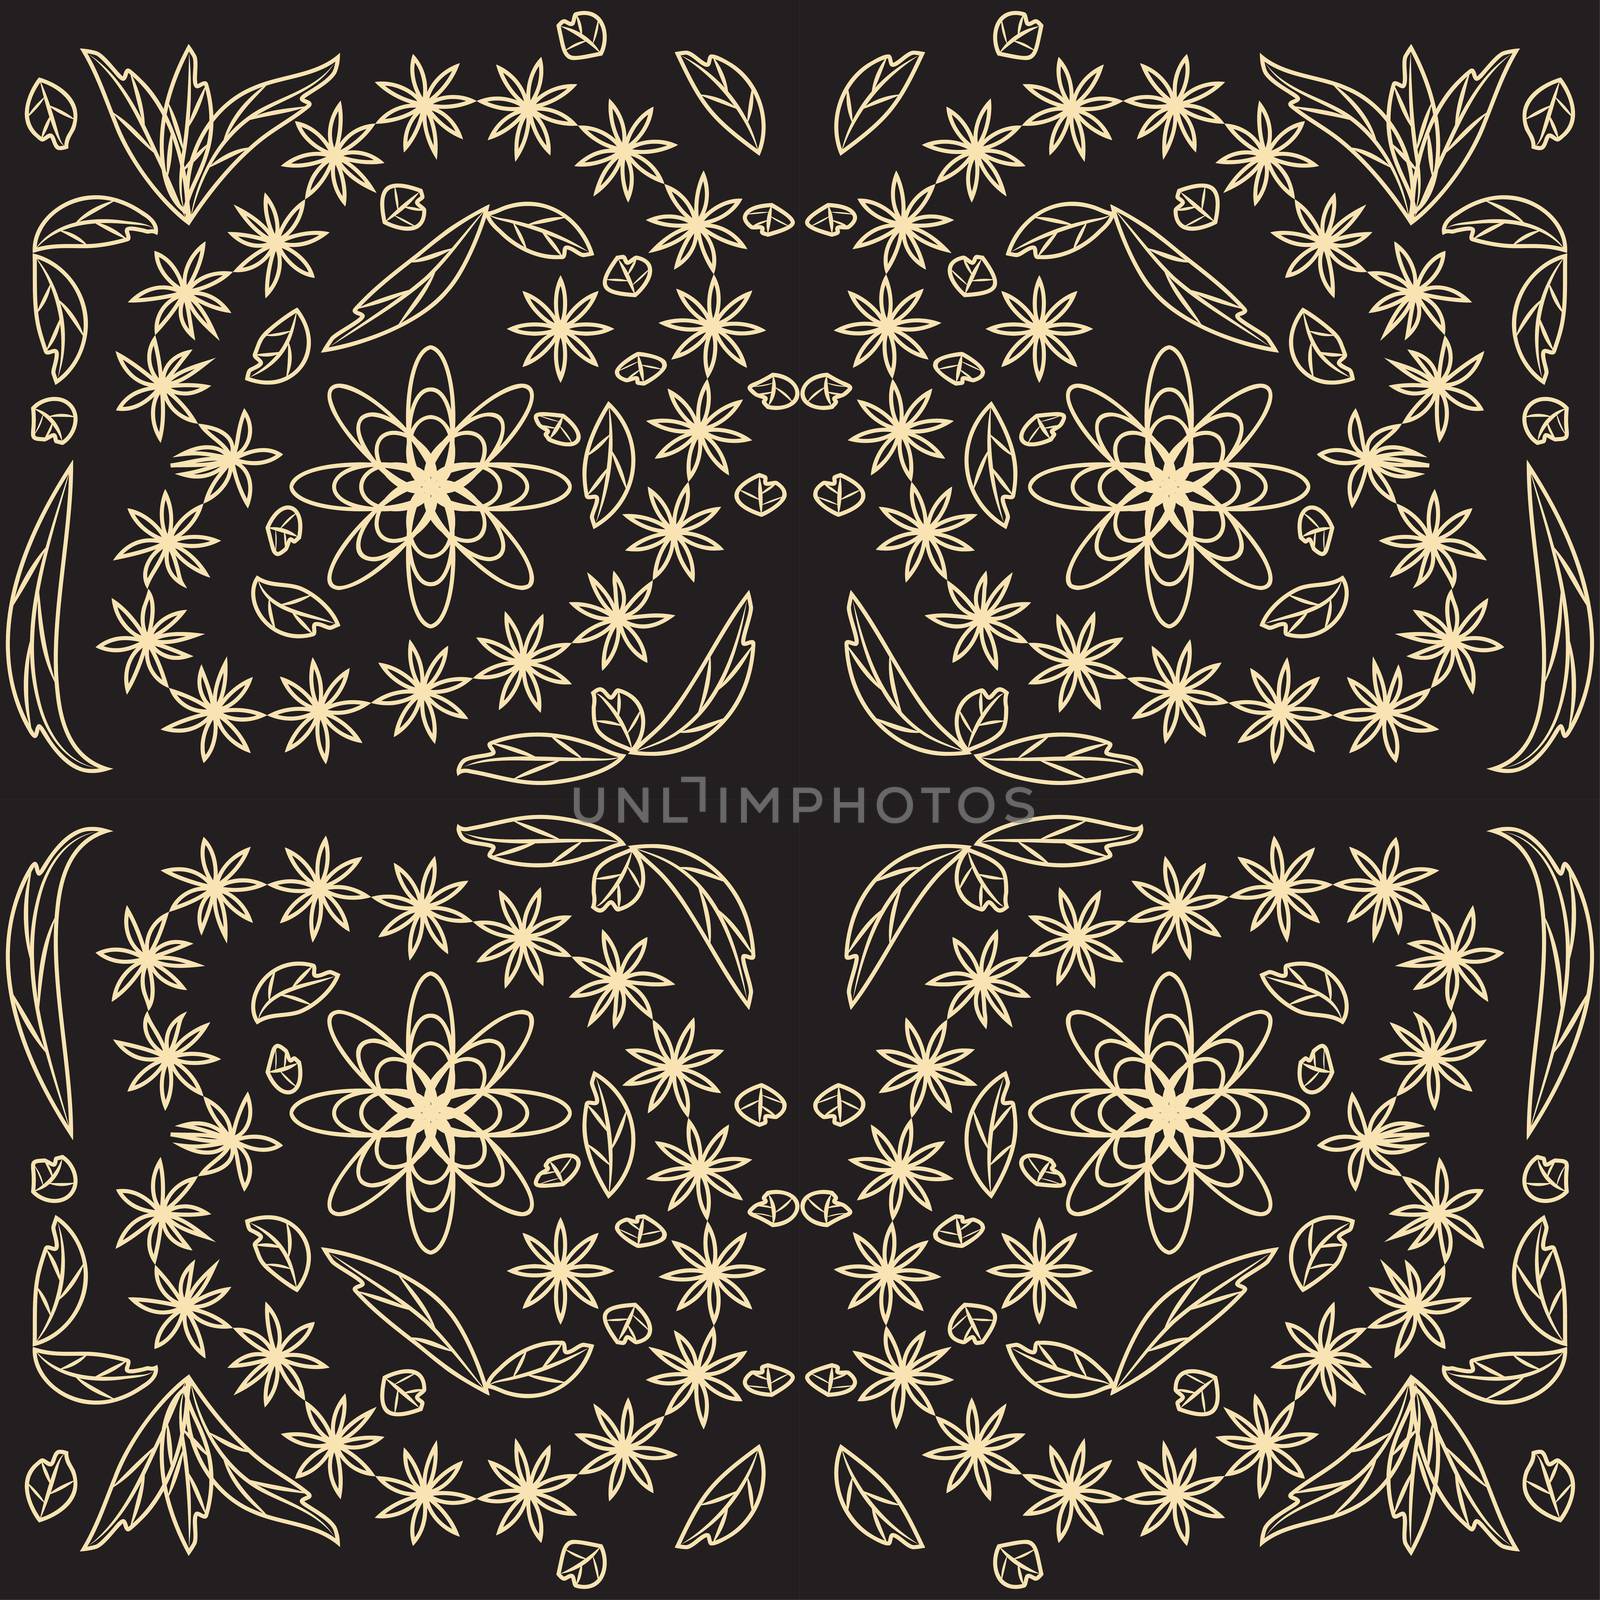 Linocut style hand drawn meadow flowers - seamless pattern. Wildflowers in modern cutout style isolated on background, vector illustration for textile, wallpaper.